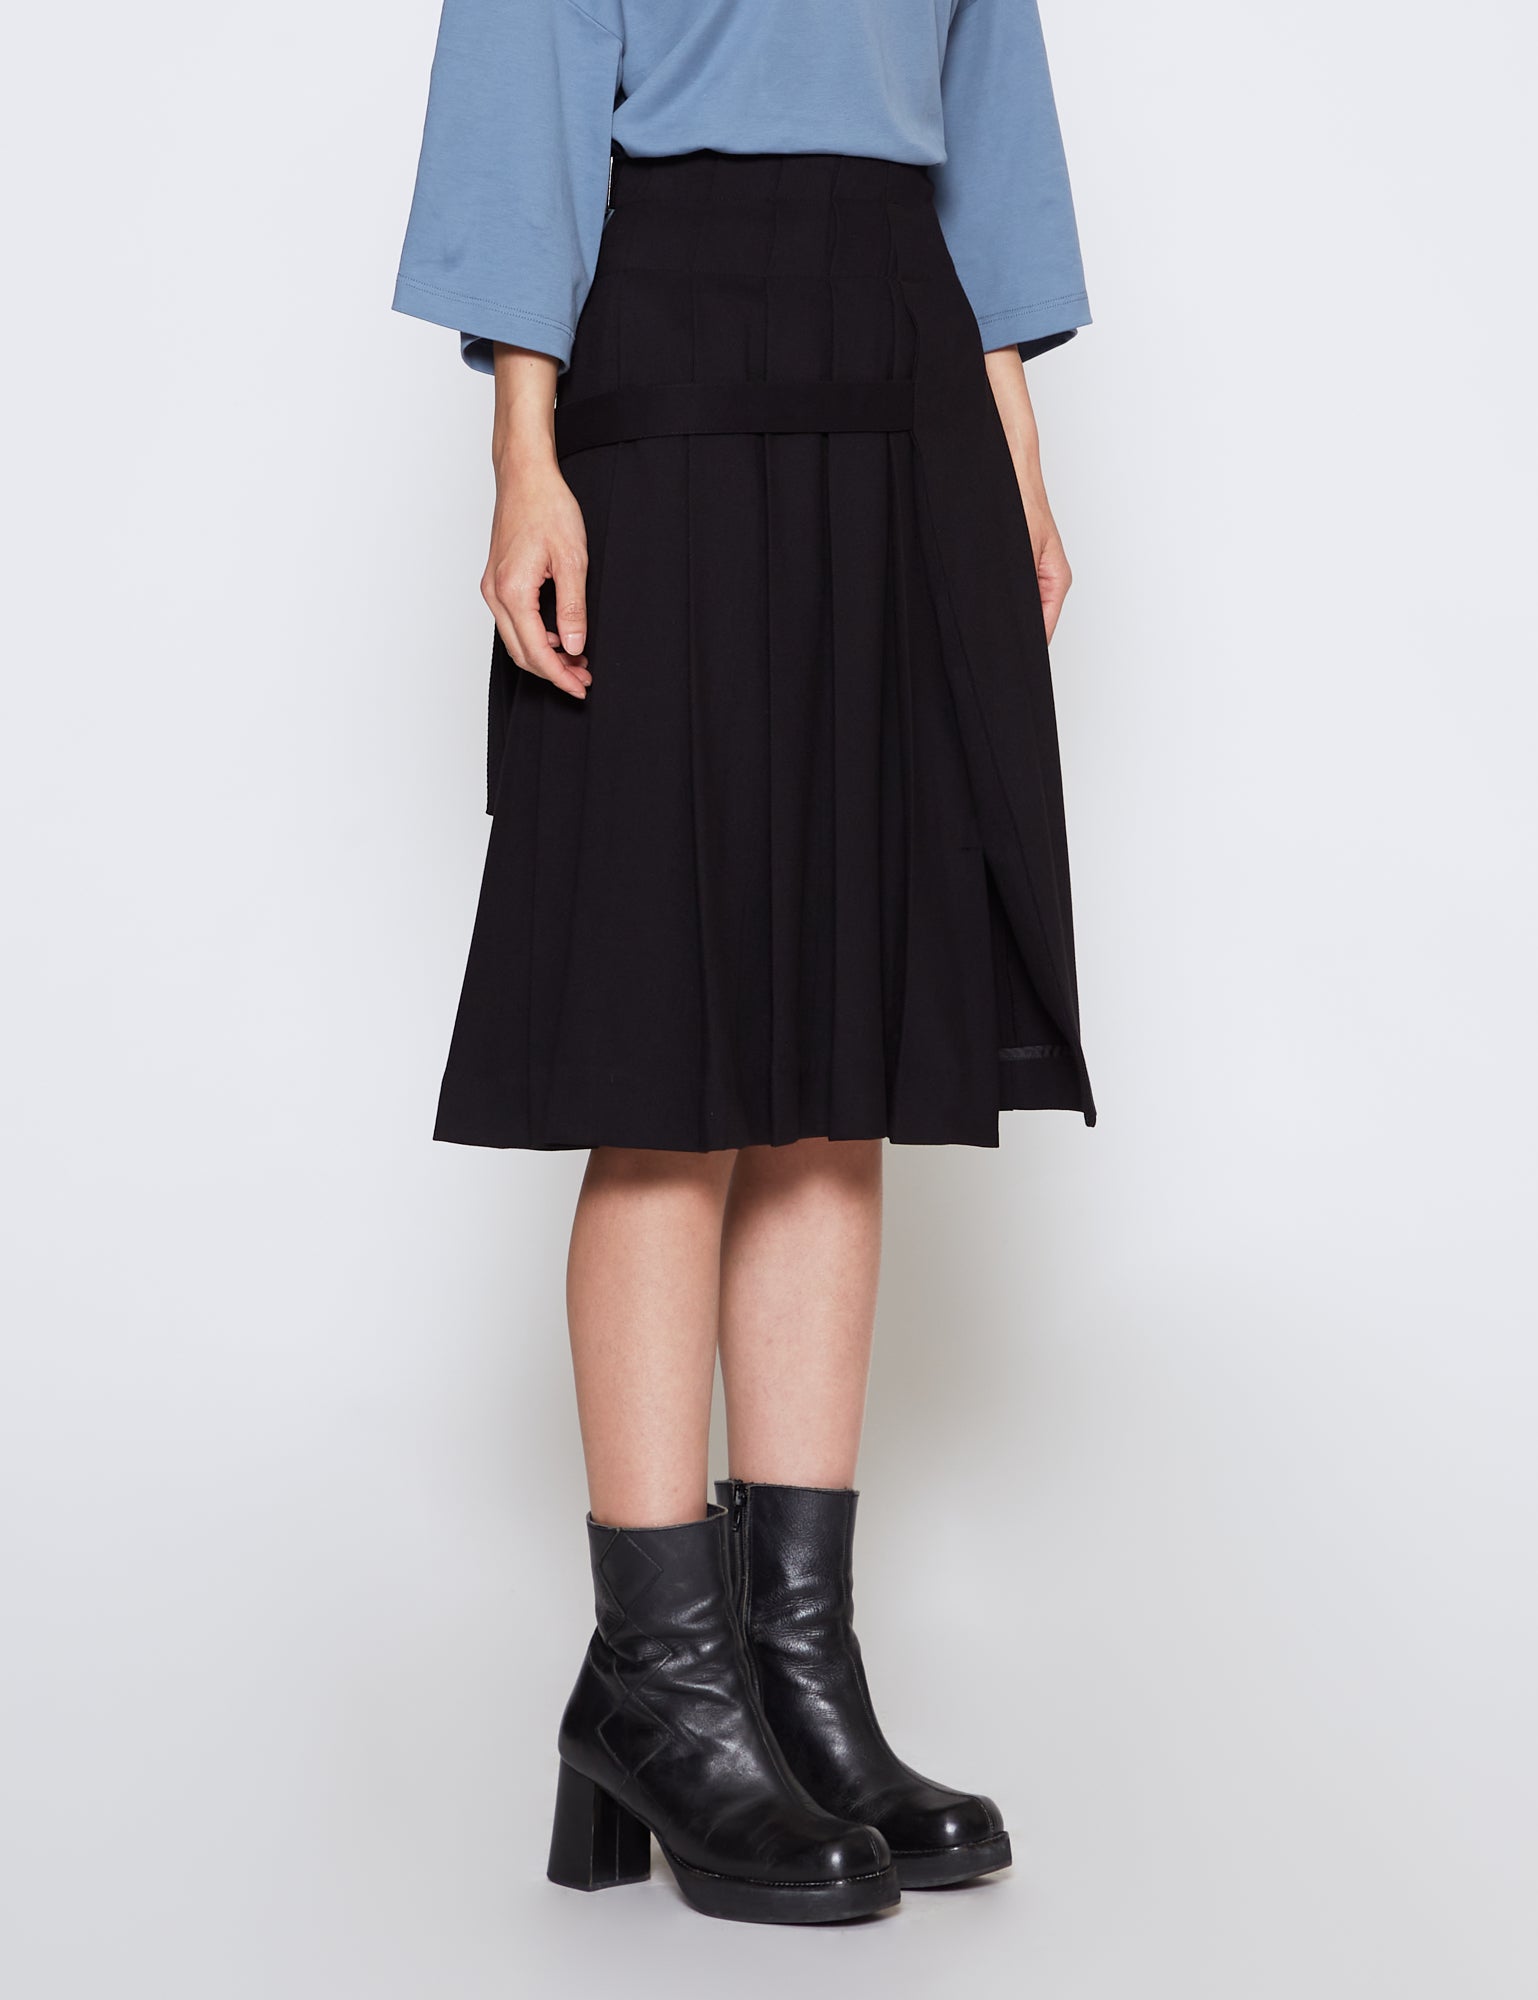 THE NEW HOUSE MONTEEL SKIRT お値段交渉いたします - ロングスカート